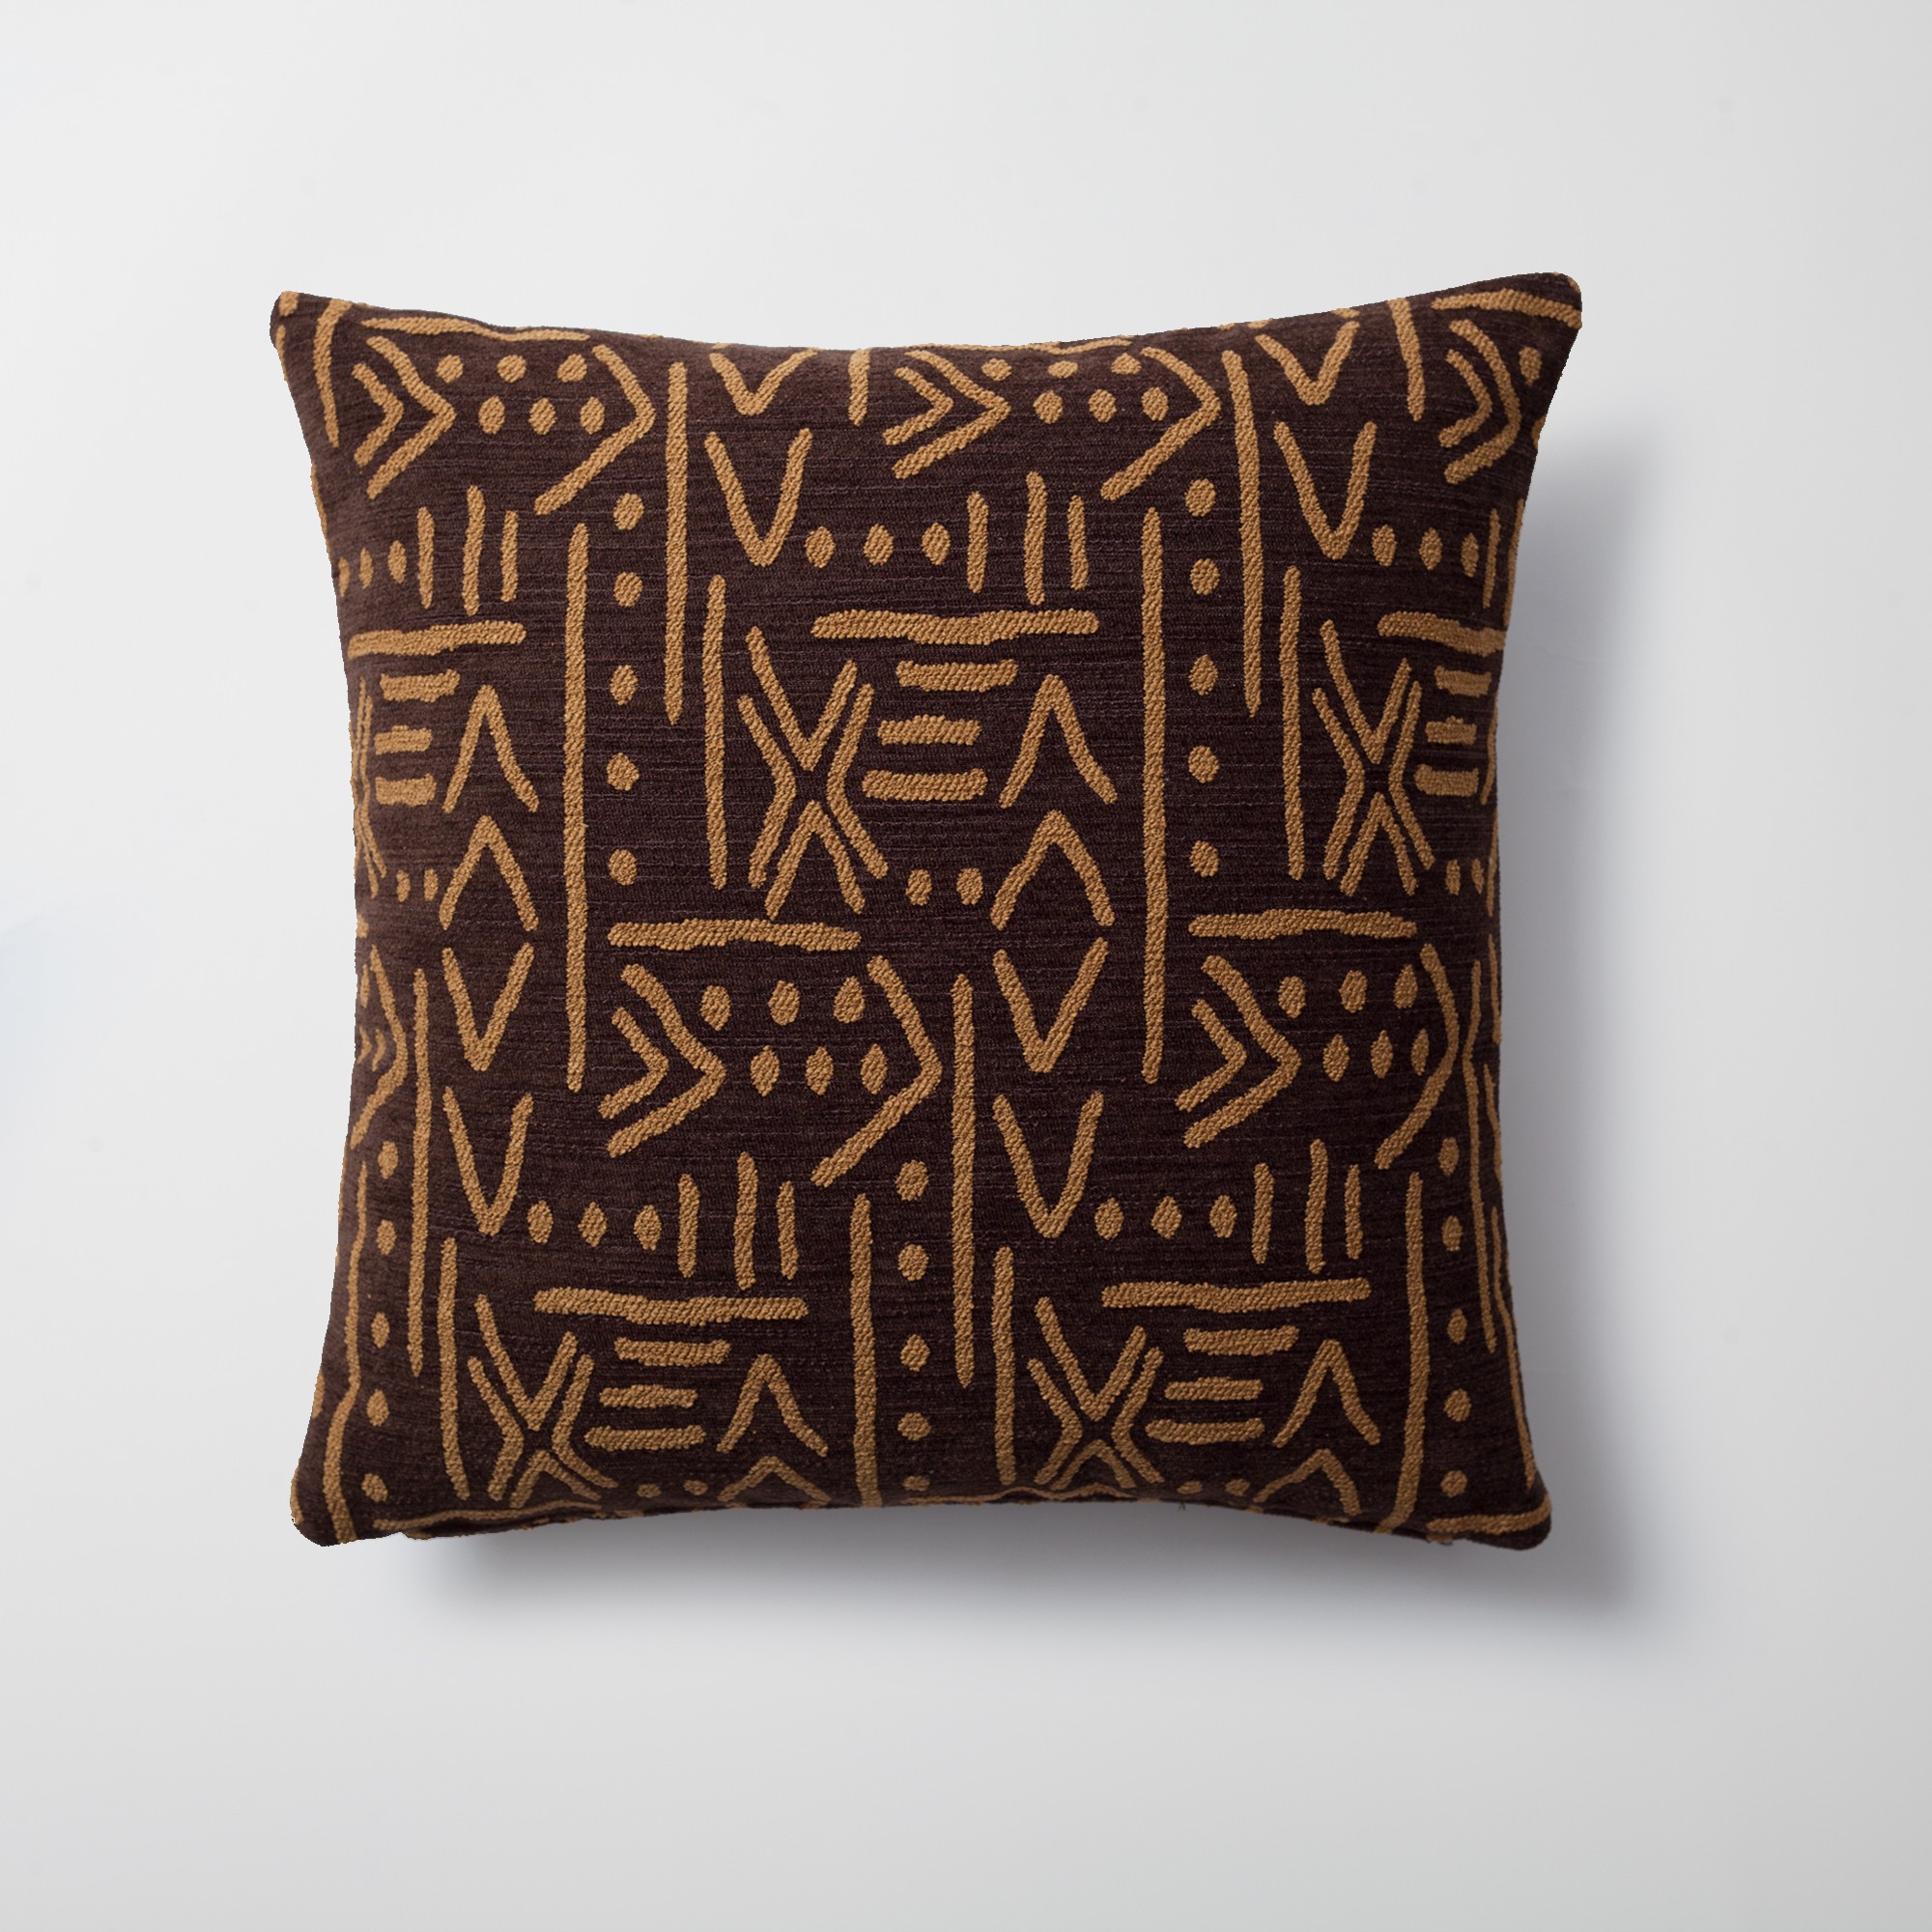 "Icon" - African Patterned 18x18 Inch Linen Pillow - Brown (Cover Only)